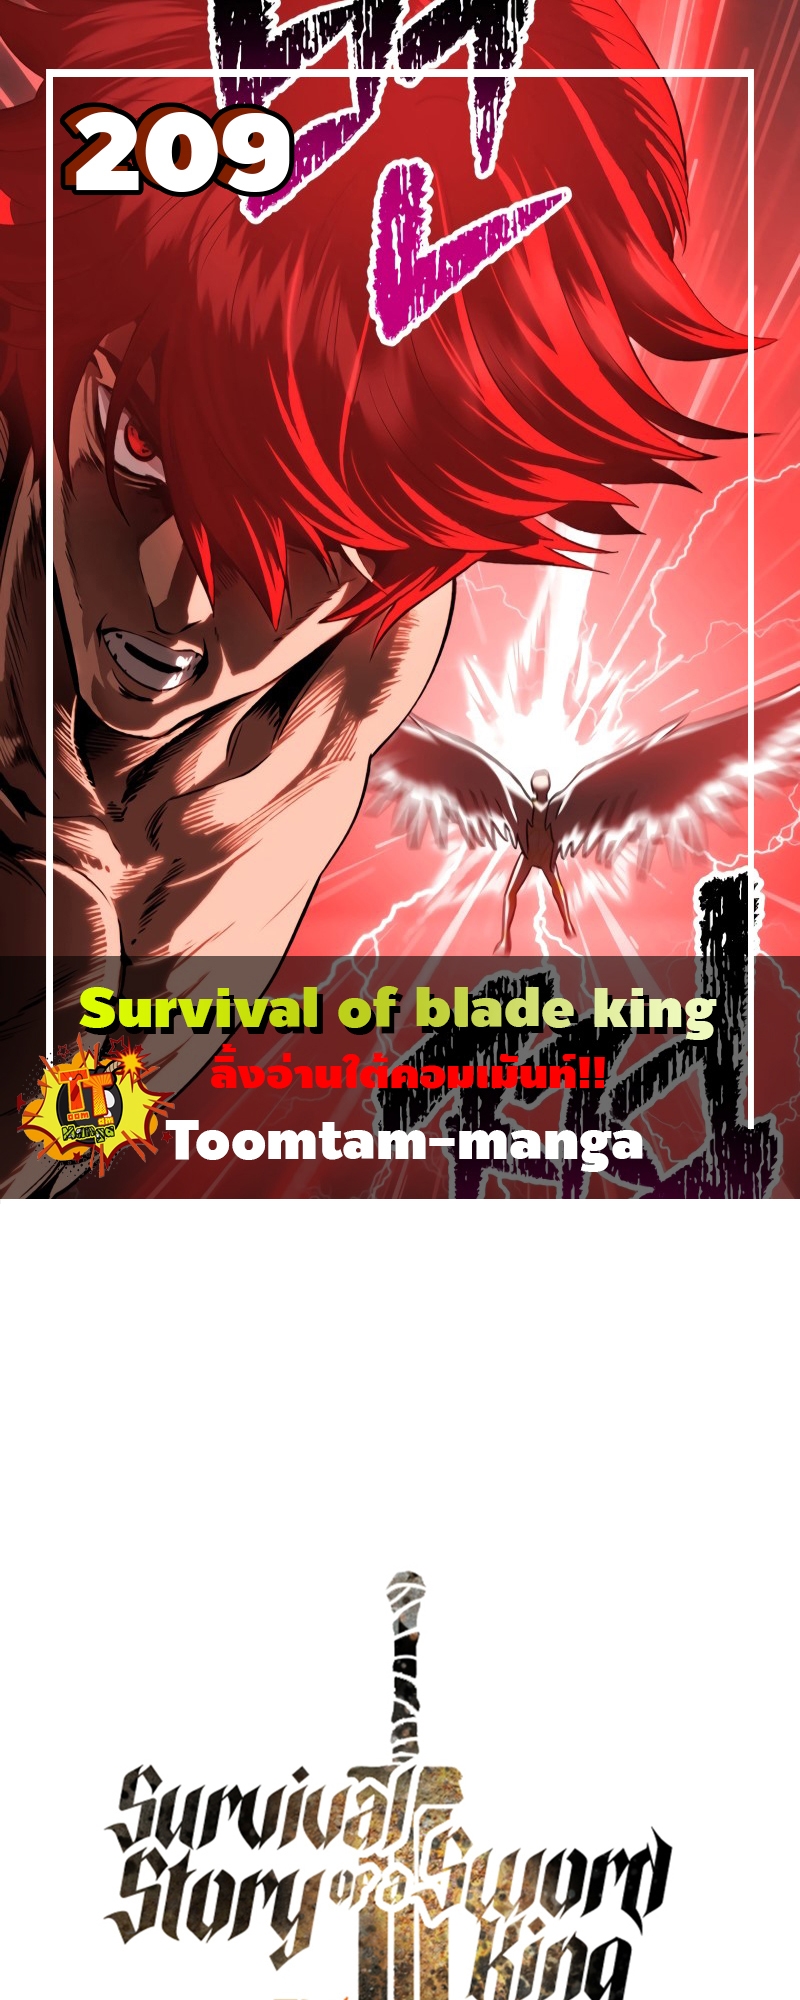 Survival of blade king 209 8 06 25670001